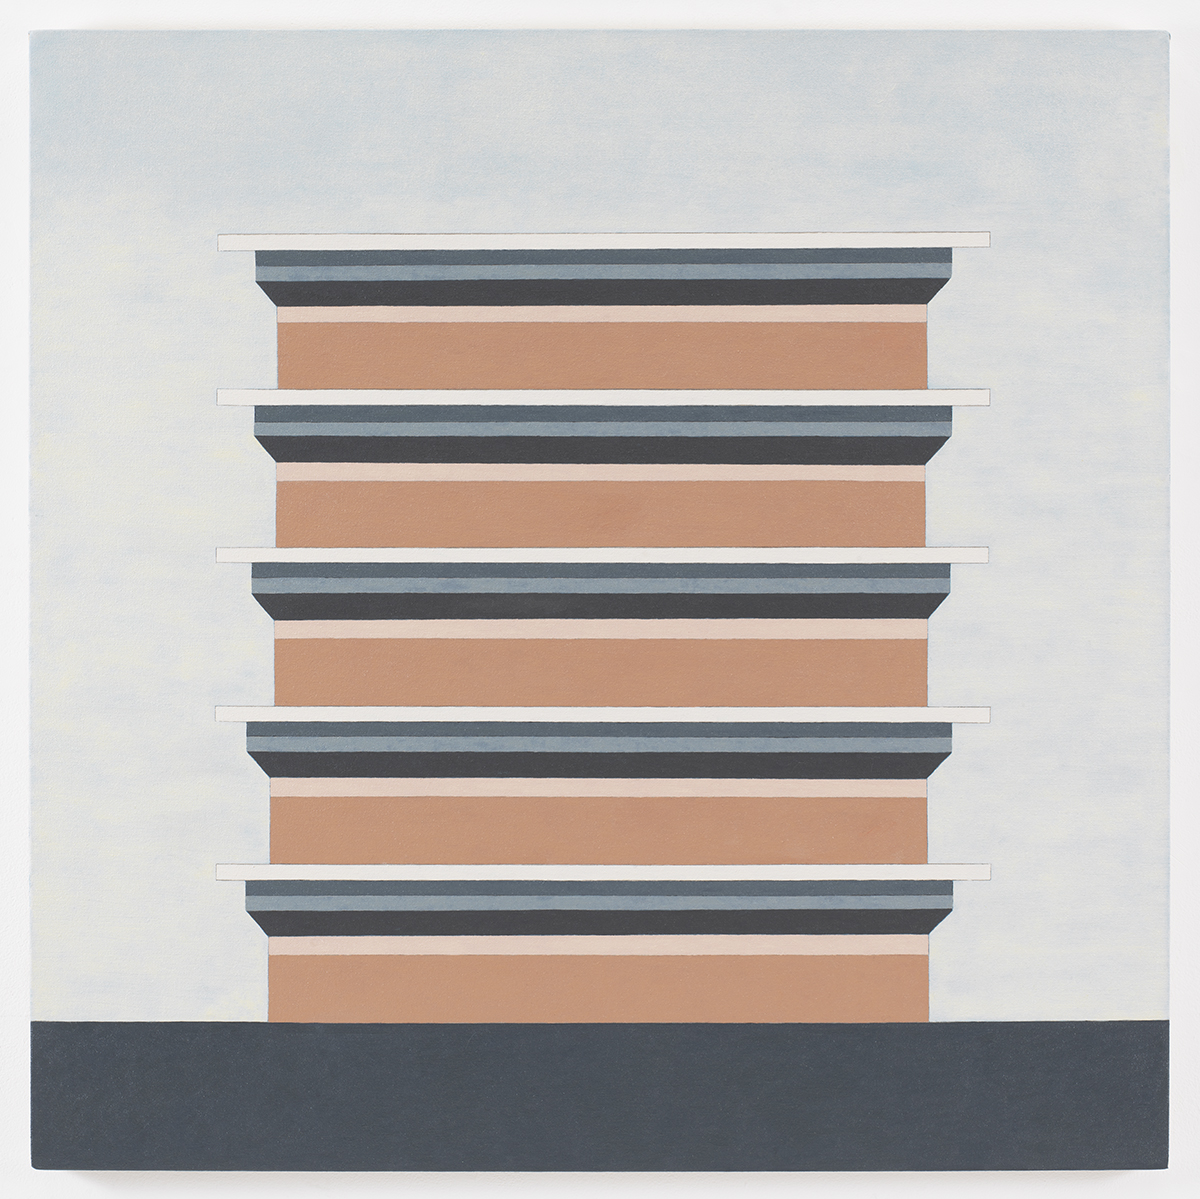 Stack N1, 2011, Oil on canvas, 38 x 38 inches